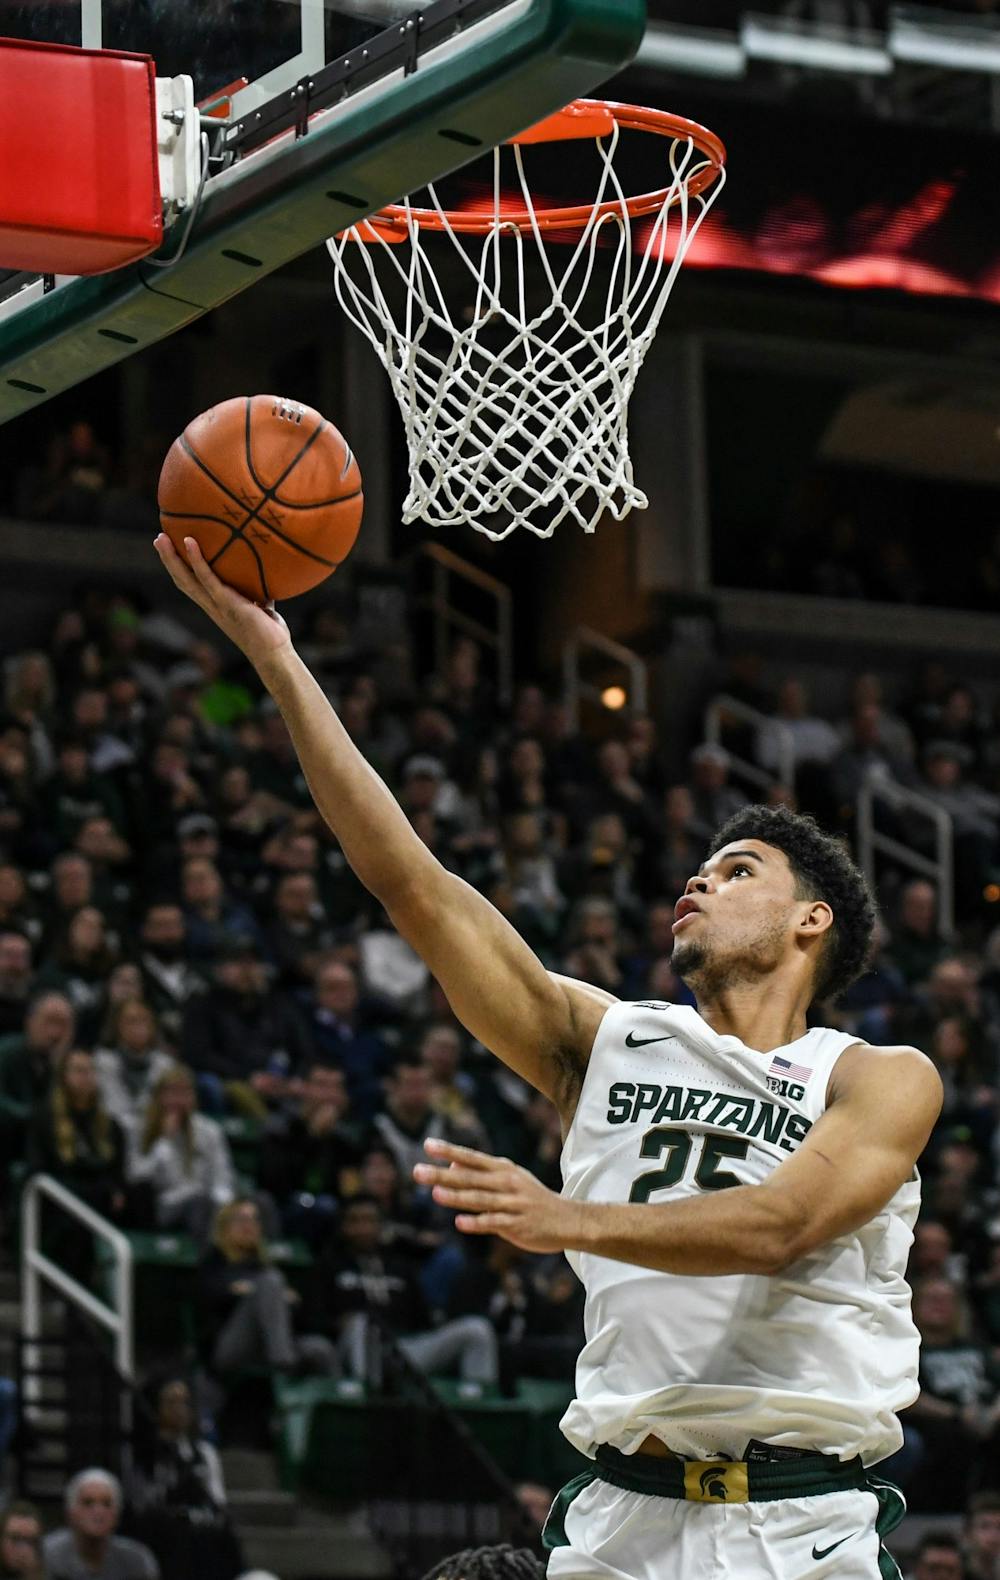 Freshman forward Malik Hall (25) lays up a basket during the game against Western Michigan Dec. 29, 2019 at the Breslin Center. The Spartans defeated the Broncos, 95-62.